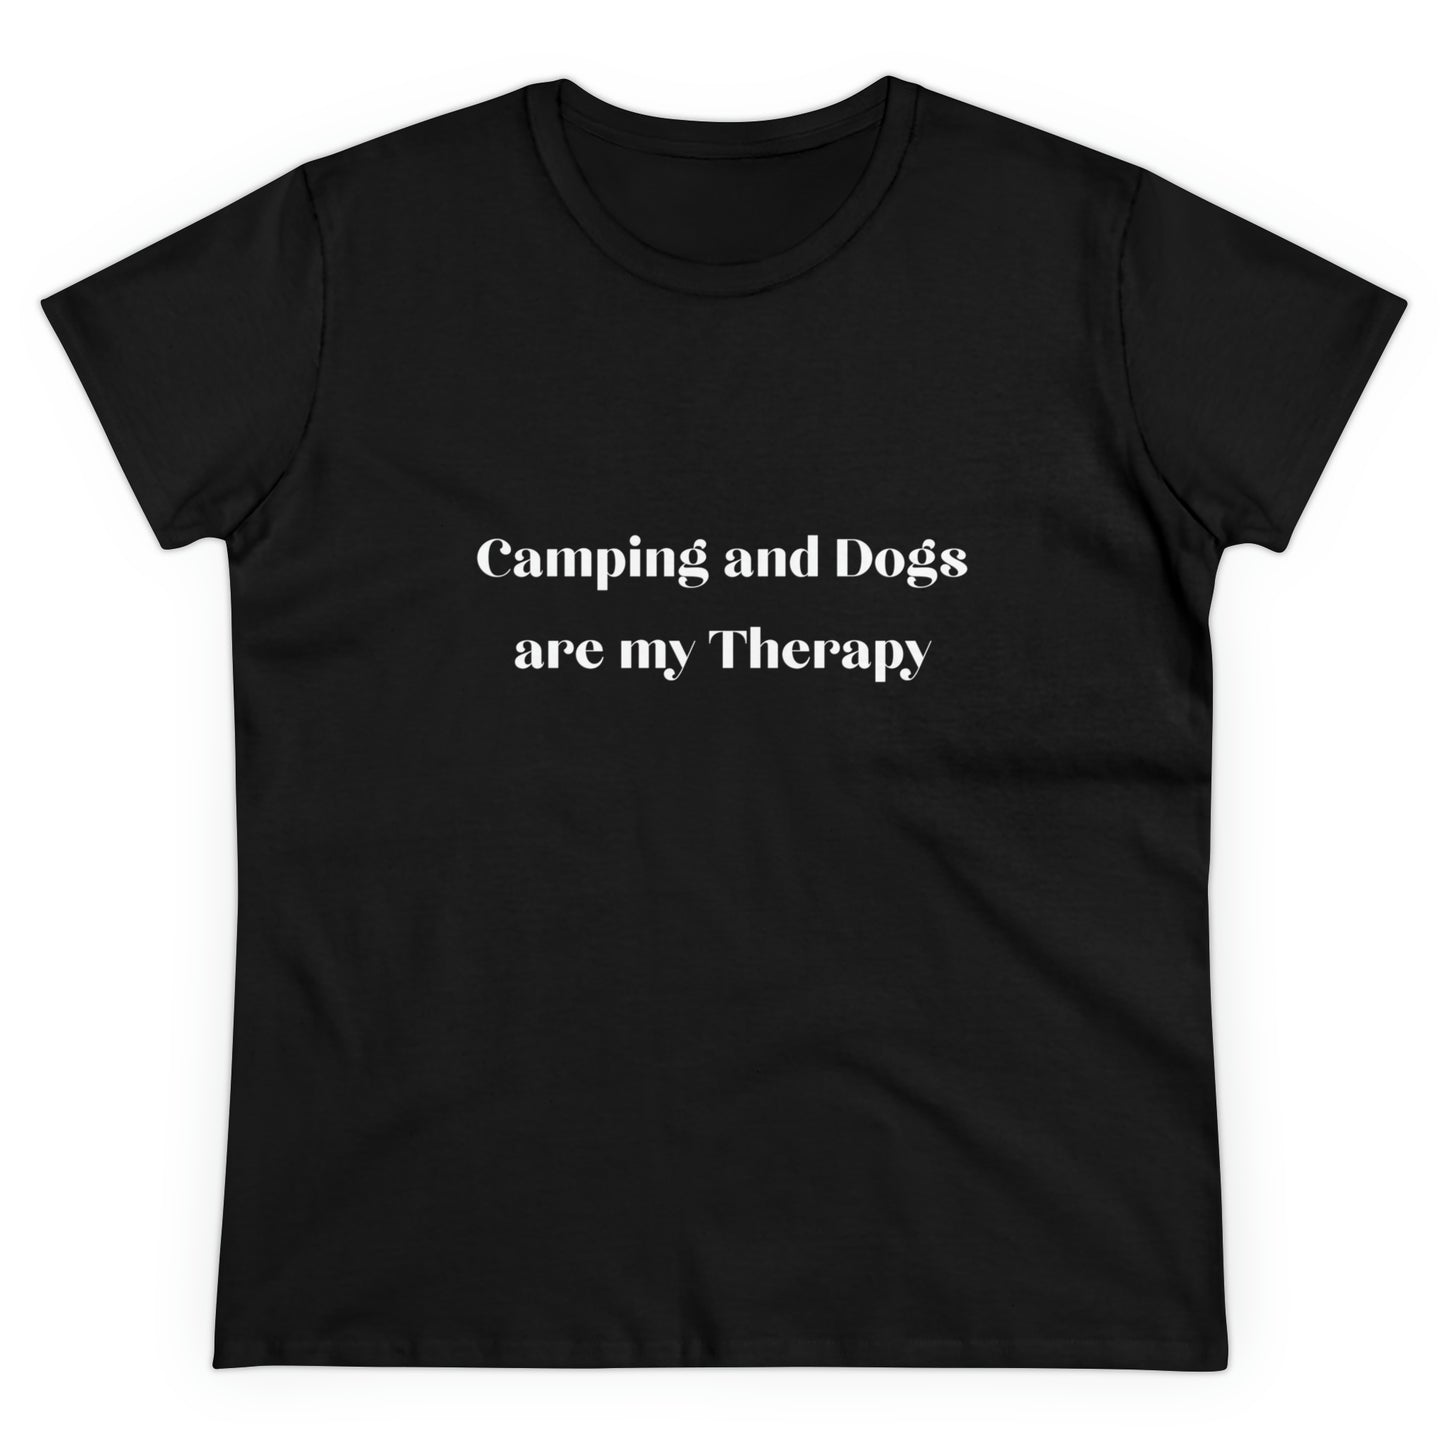 woman's camping with dog shirt black